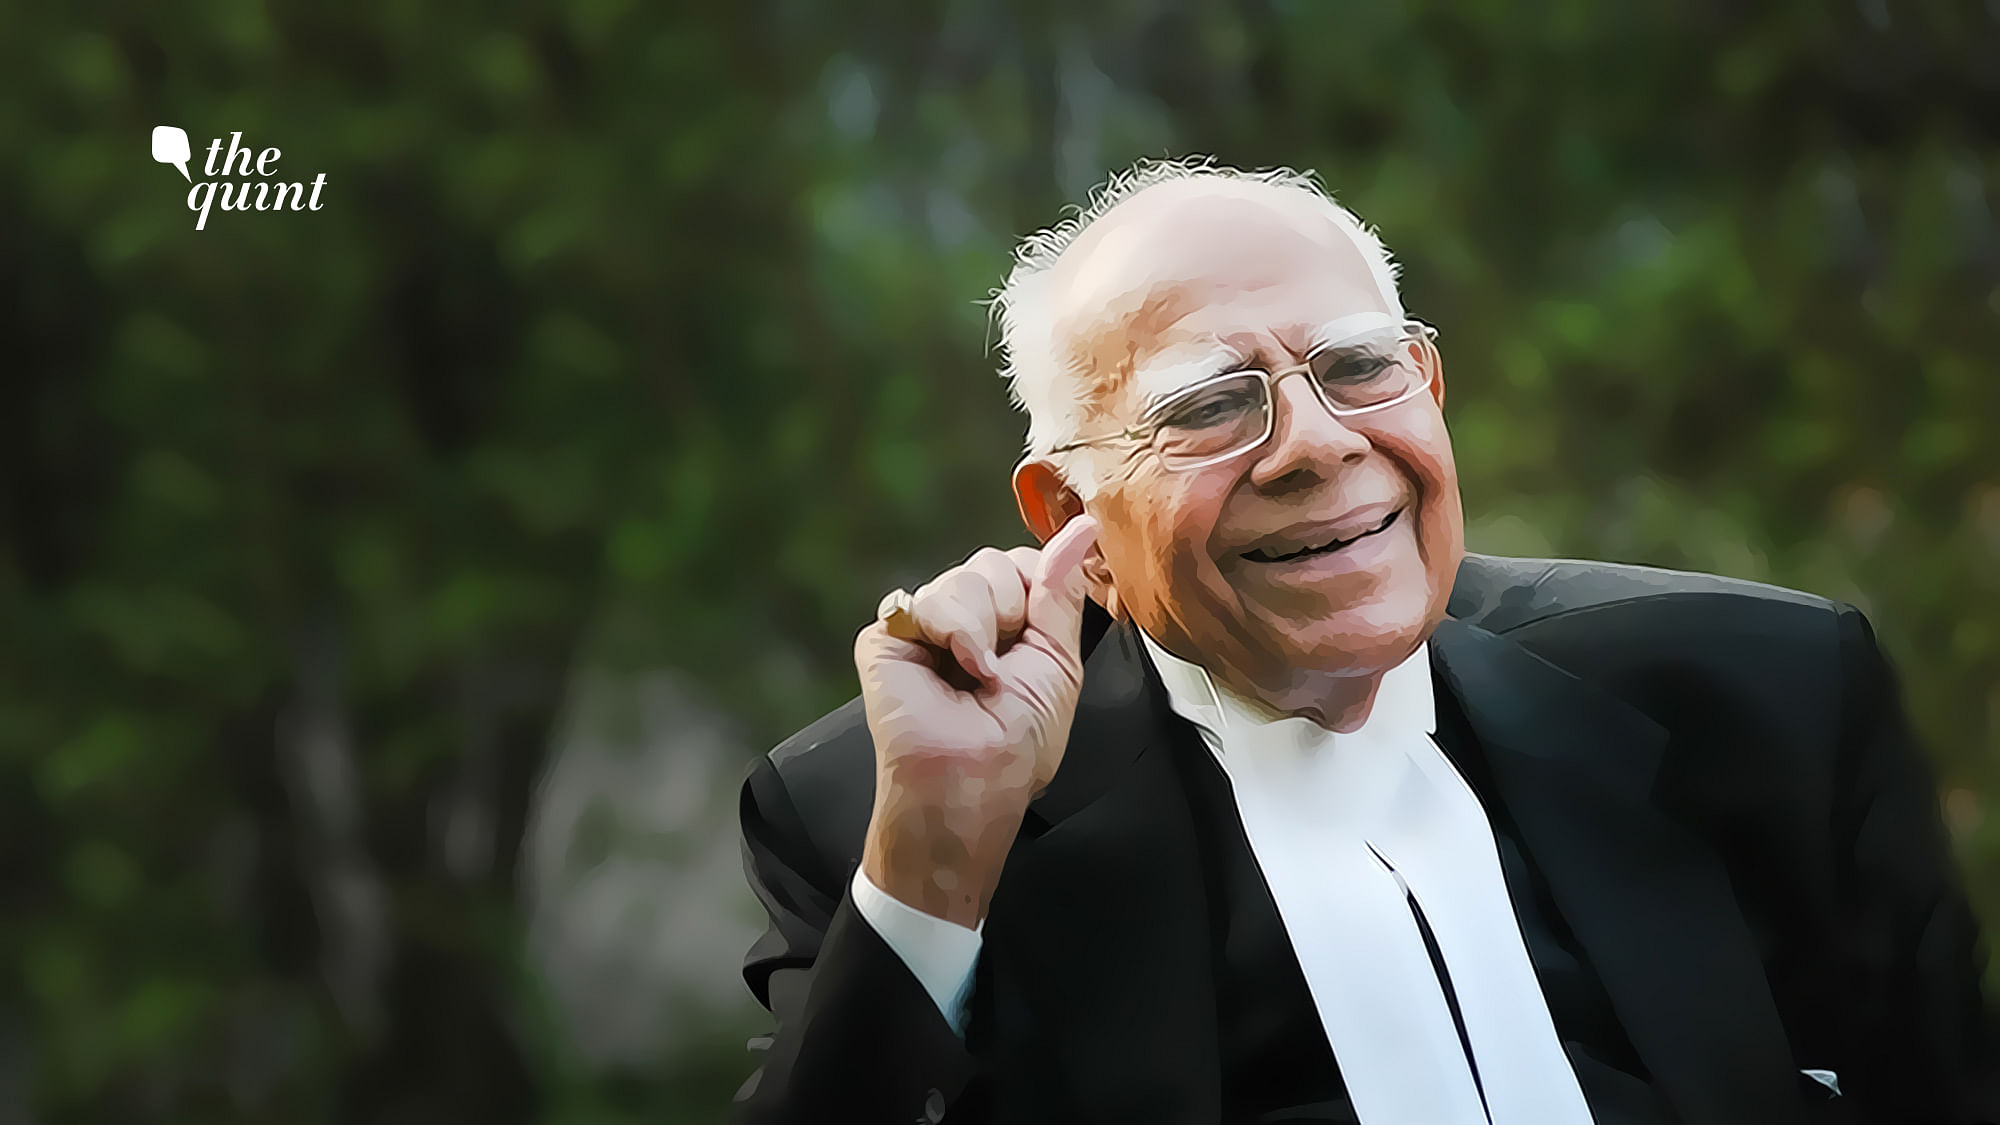 Ram Jethmalani had great tenderness for his close friends and family and never hesitated in giving his all in their times of distress, writes Dr Abhishek Singhvi.